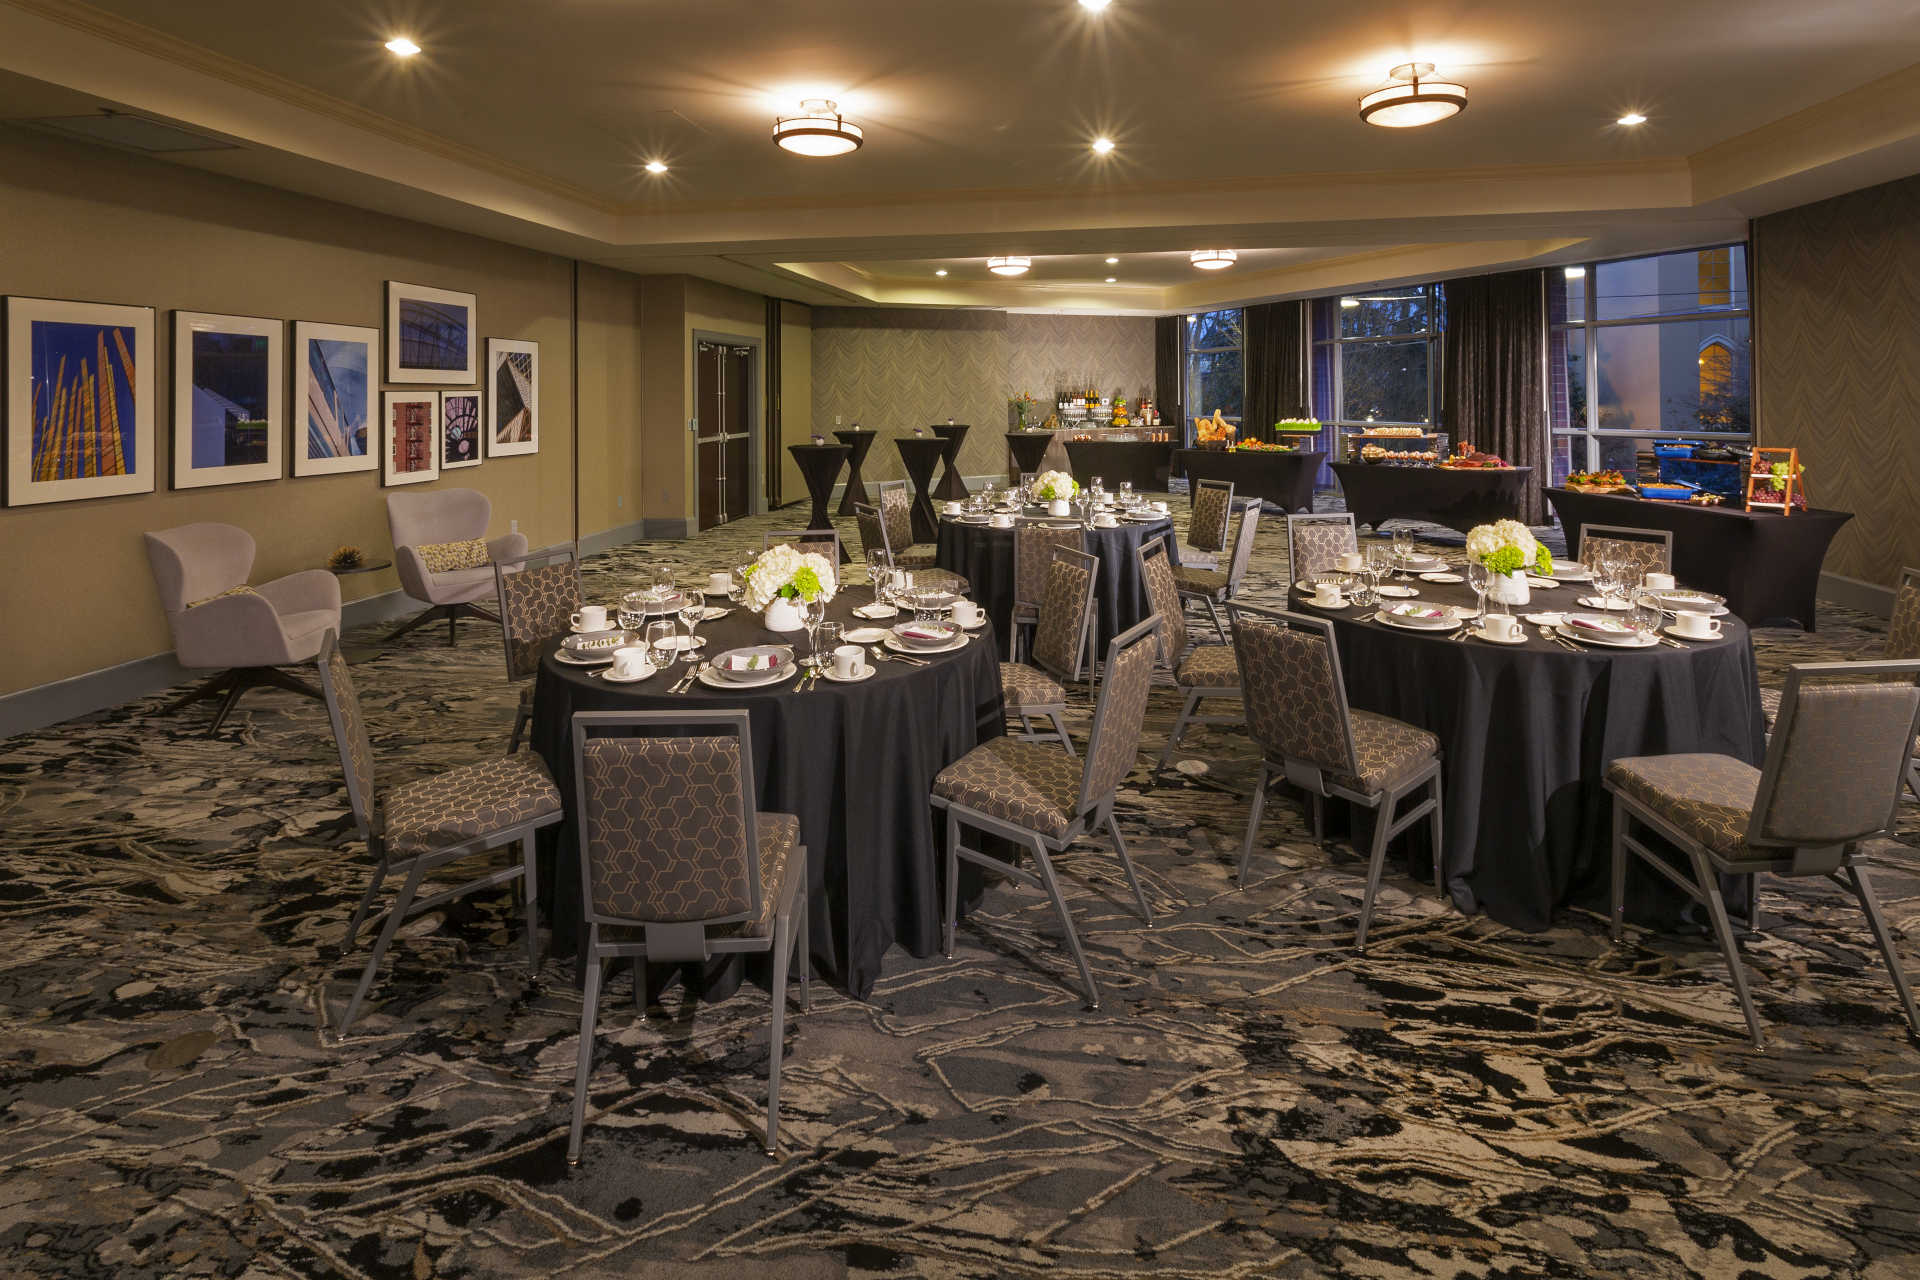 With up to 1,800 square feet of pillar-free space in our Broadway and Madison rooms, the Silver Cloud Hotel Broadway can host banquets, receptions, weddings, brunches and beyond.